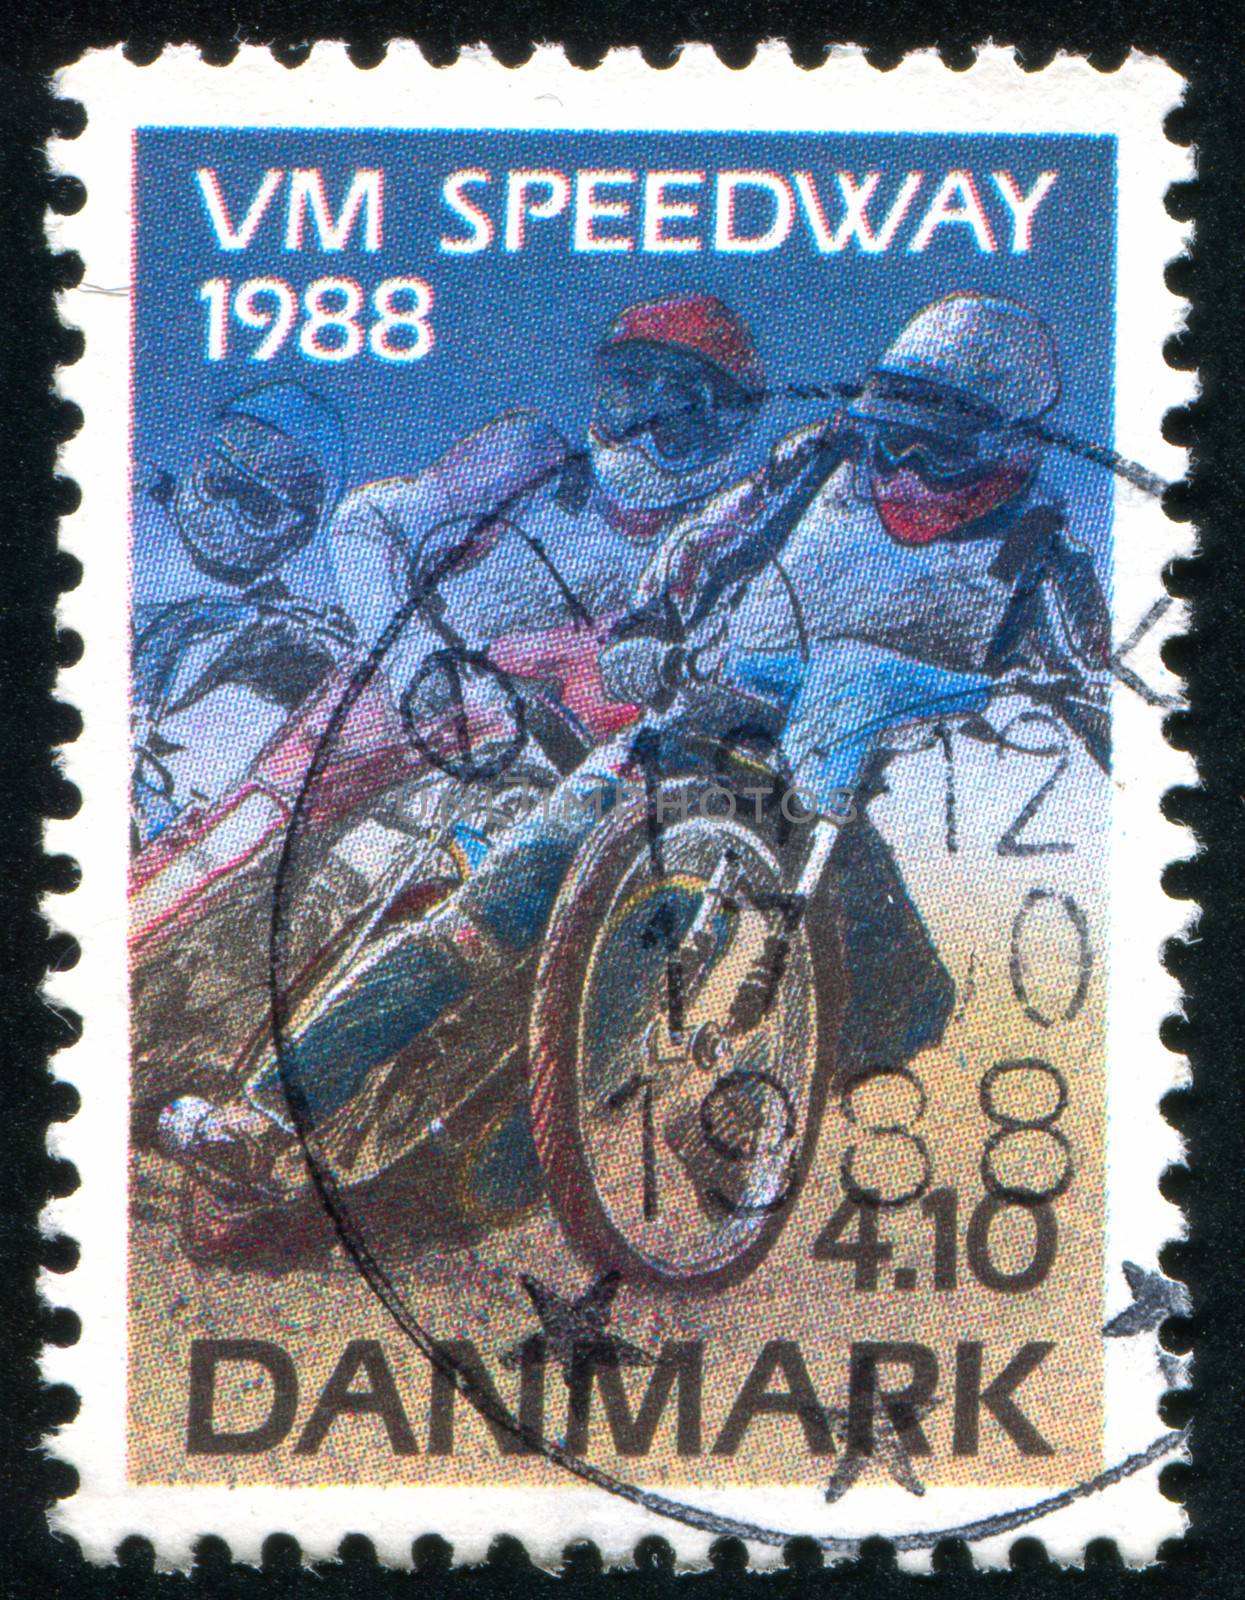 Individual Speedway World Motorcycle 
Championships by rook